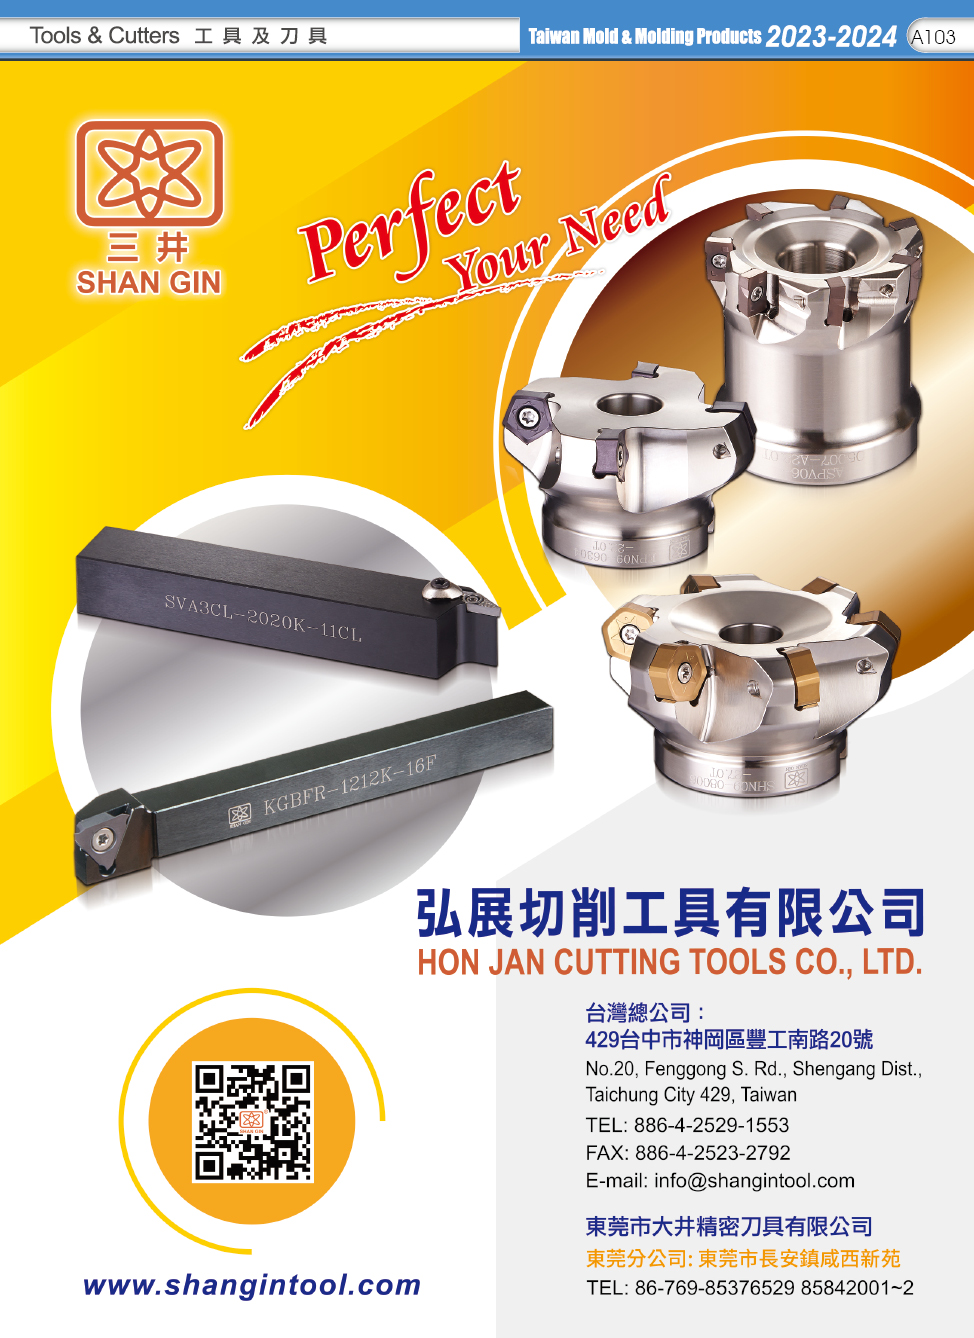 2023 TAIWAN MOLD & MOLDING PRODUCTS